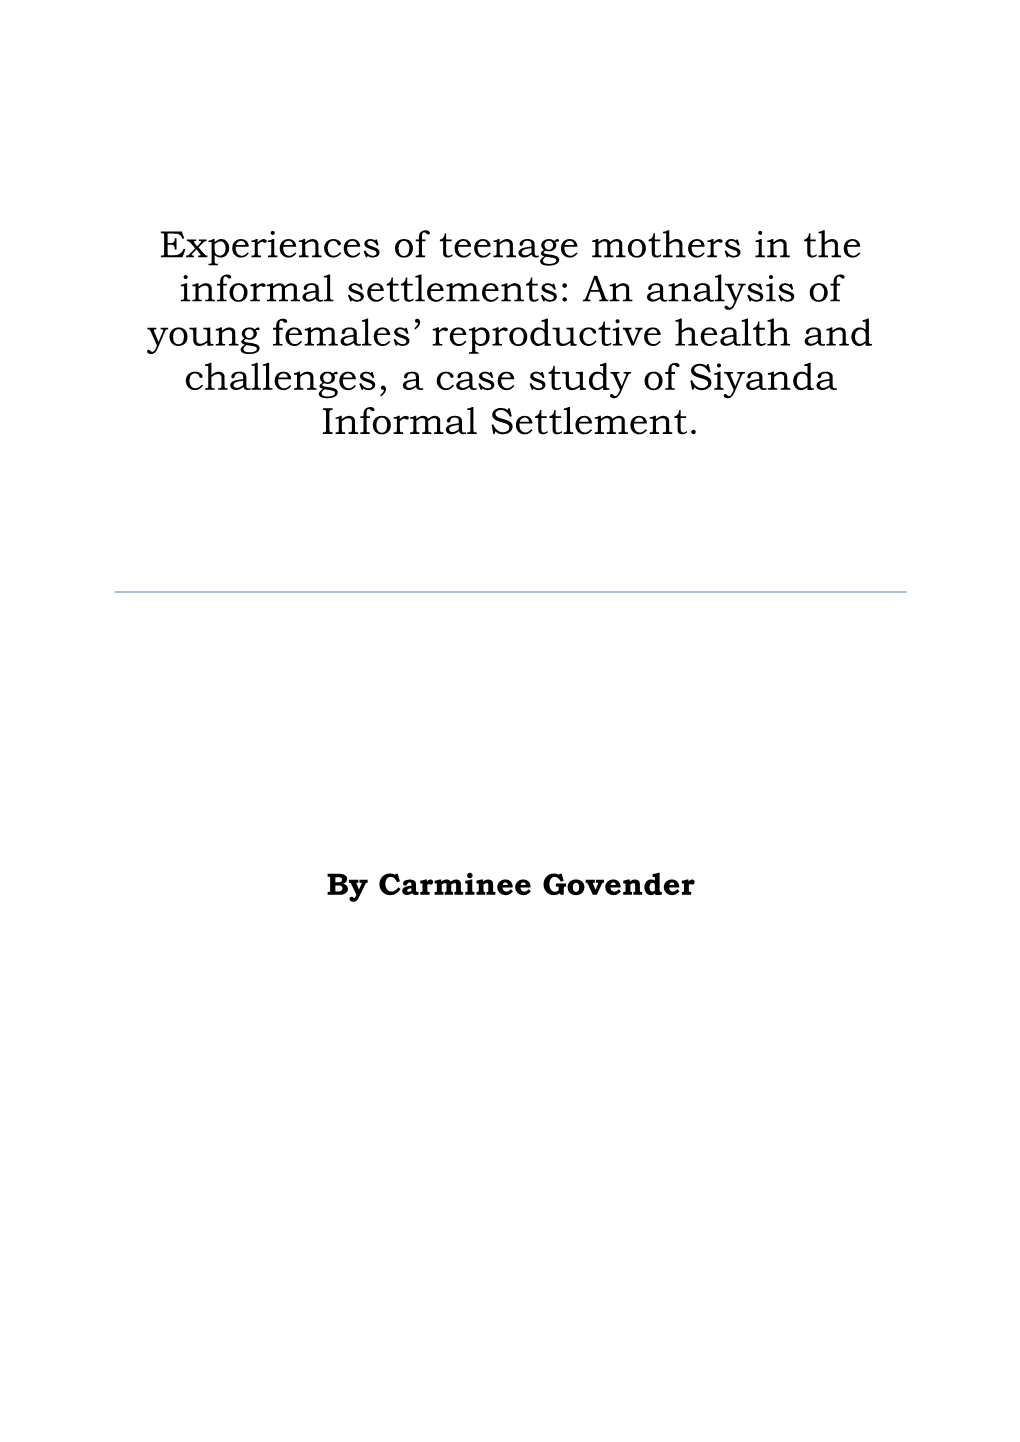 Experiences of Teenage Mothers in the Informal